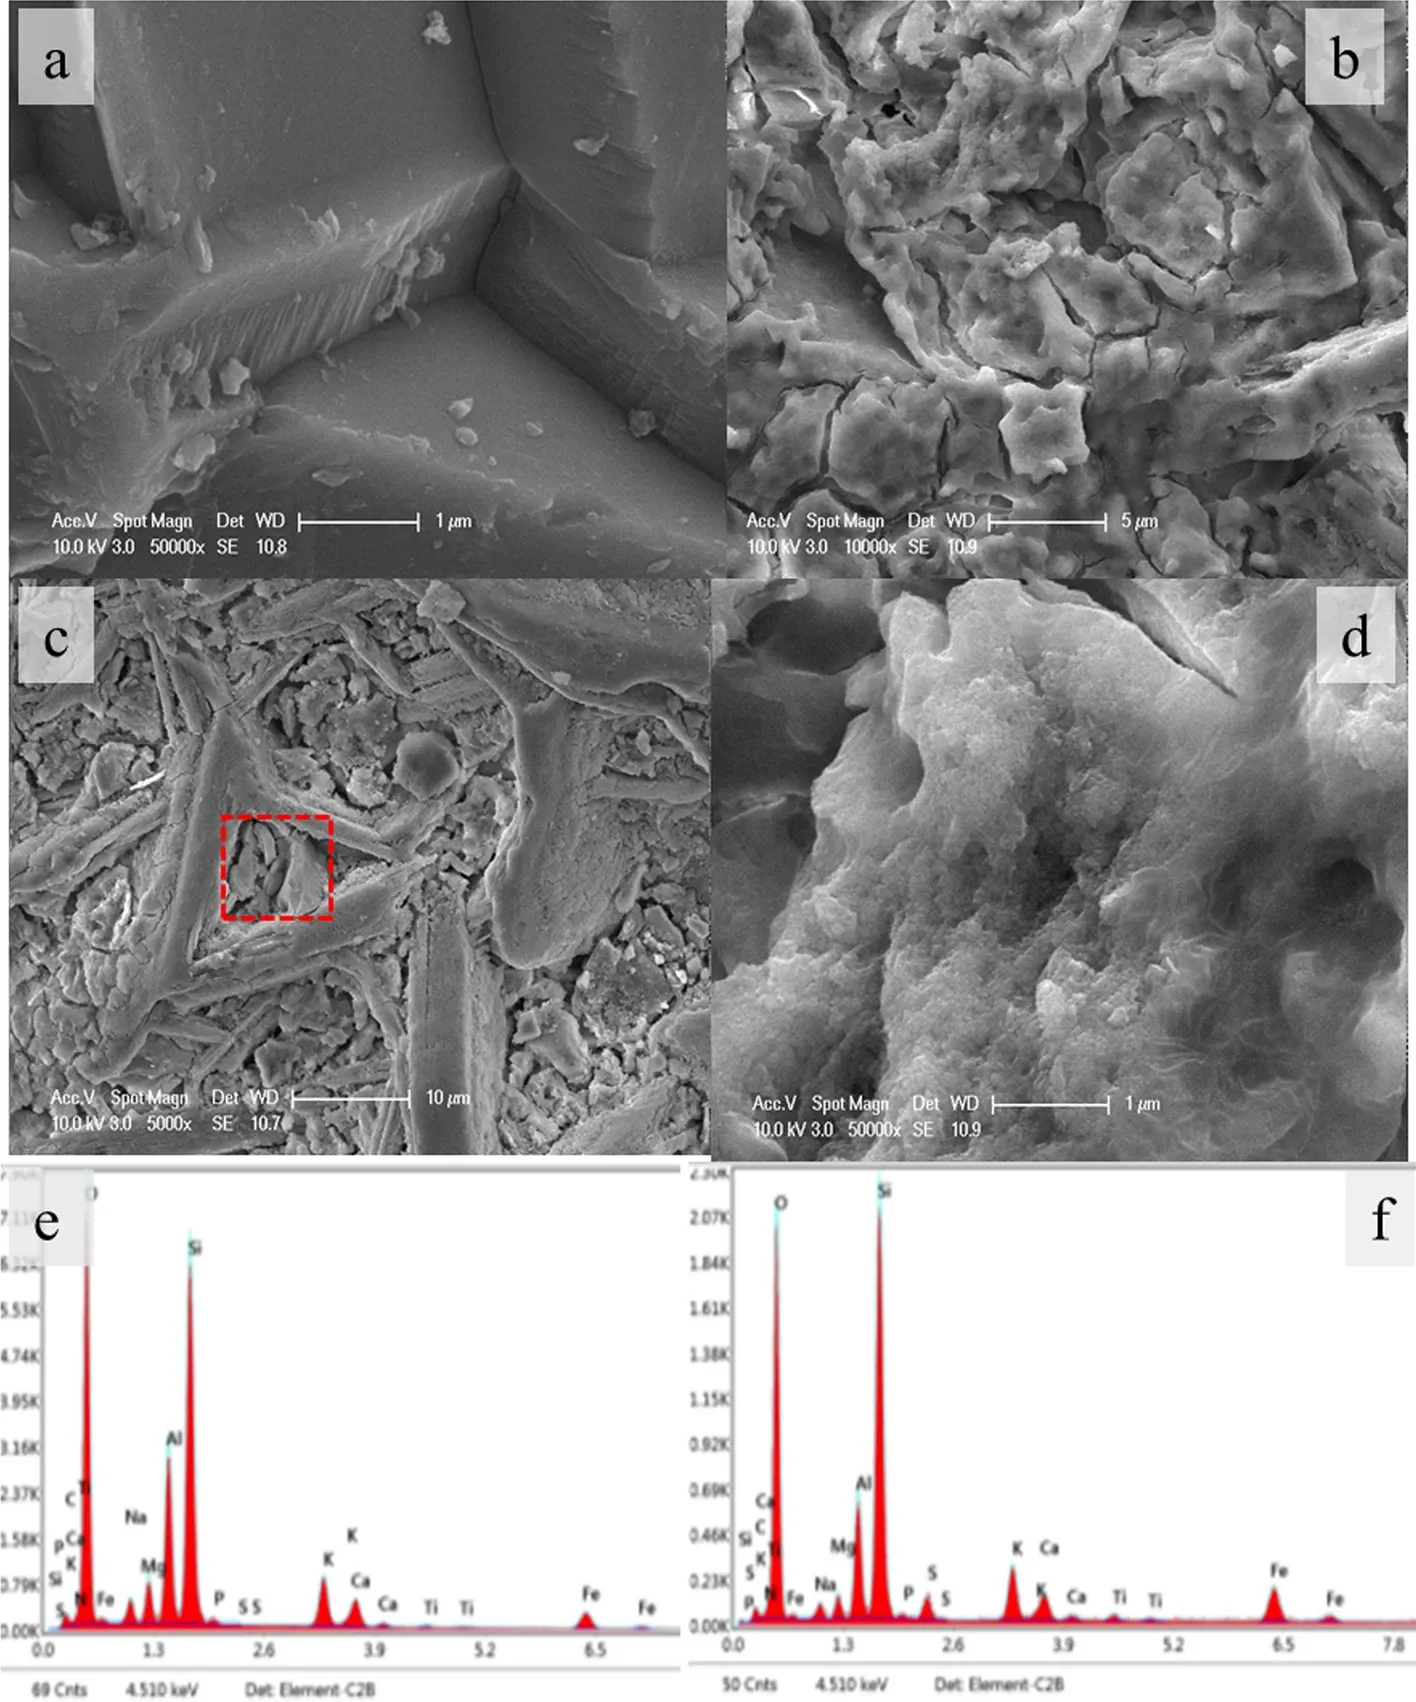 Fig 9: SEM photomicrographs of the abiotically reacted basaltic grains in acid sulfate solution. a) Surface of the pre-reacted BS1 grains. b-c) Surface of the post-reacted BS1-AB grains. d) A closer view of the red square in c. e) EDS spectra of a. f) EDS spectra of the post-reacted basalt grains in d